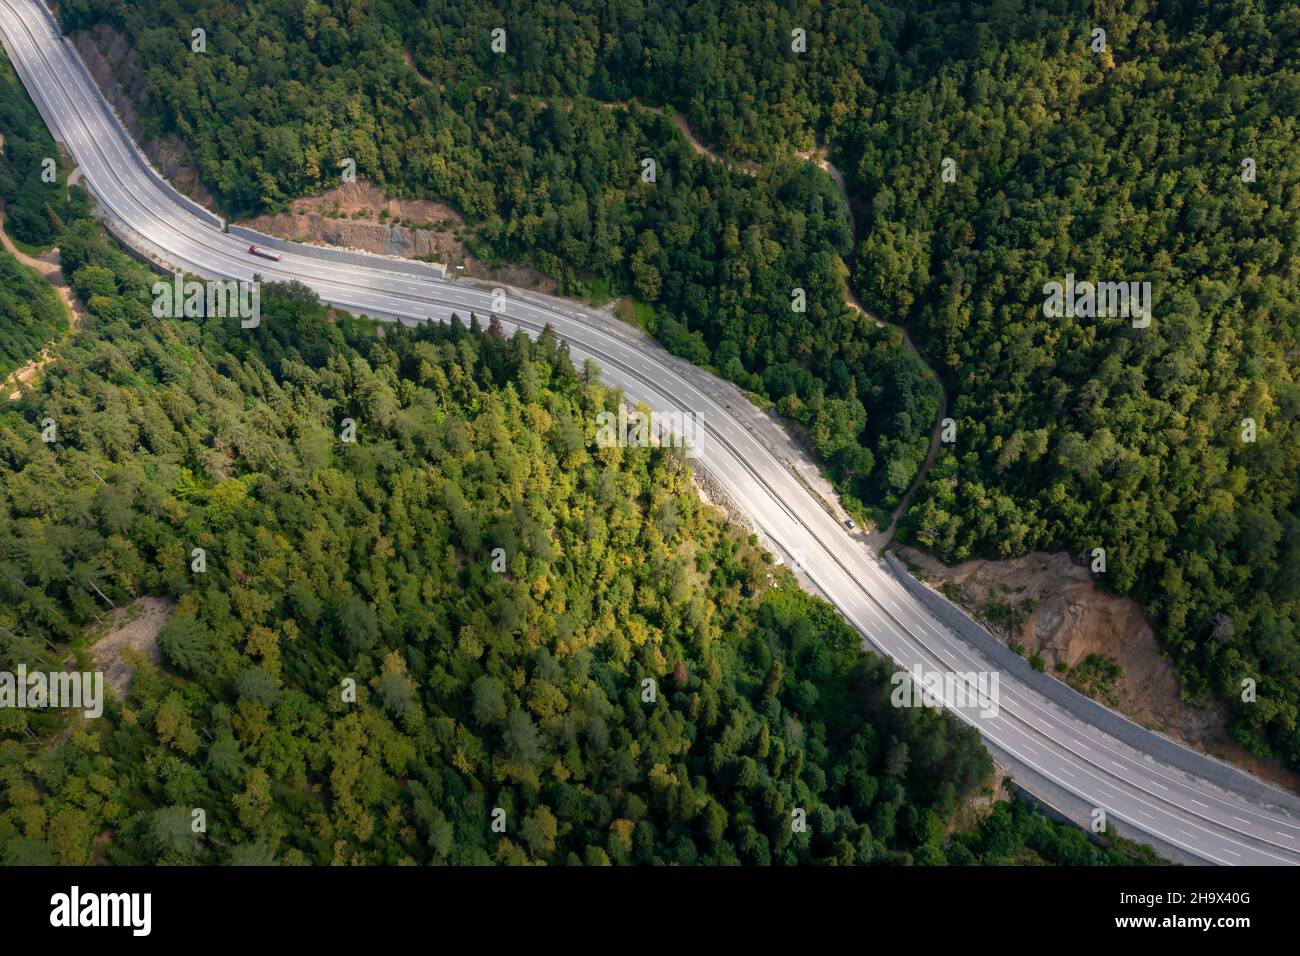 a road and vehicles in the black sea forests, Mengen, Turkey Stock Photo